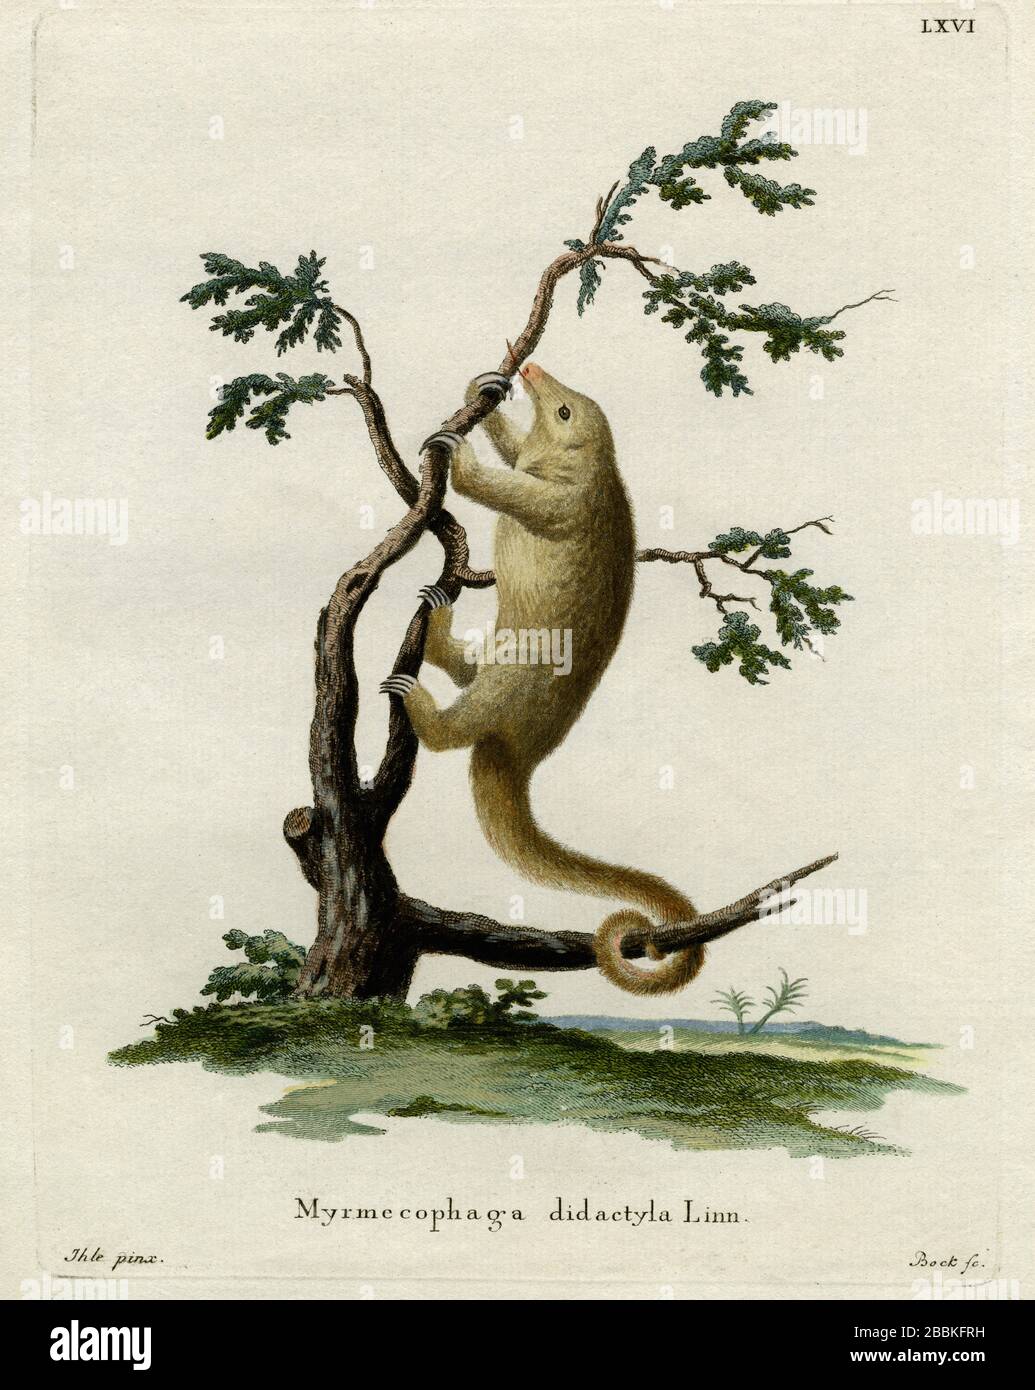 Pygmy anteater, also known as the silky, two-toed or dwarf anteater.  Engraving created in the 1700s for renowned work on mammals by German naturalist, Johann Christian Daniel von Schreber, the multi-volume 'Die Saugthiere in Abbildungen nach der Natur mit Beschreibungen' ('The Mammals in Accordance with Illustrations of Nature with Descriptions'), published from 1775 to 1792. Collectively, the mammals featured by Schreber in this work have come to be known as 'Schreber's Fantastic Beasts'. The engraving was later coloured by hand. Stock Photo